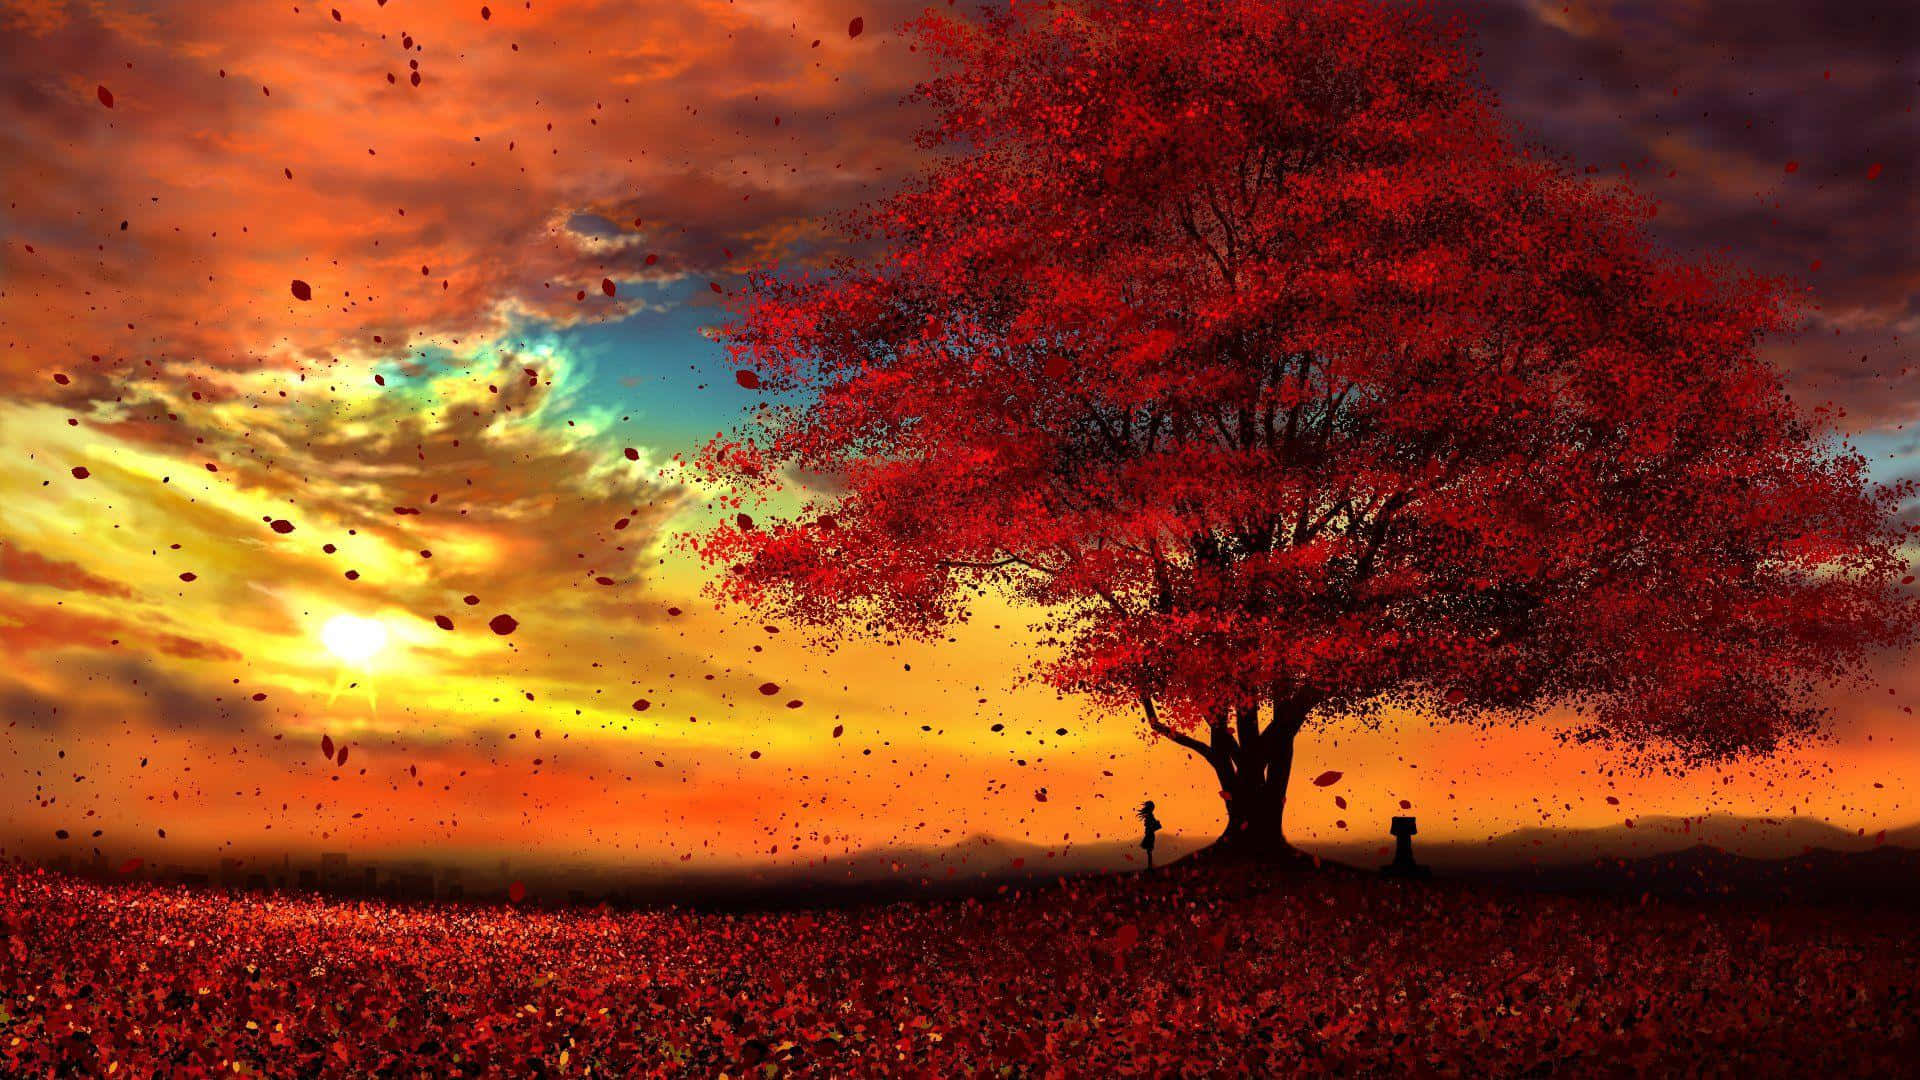 A majestic red tree's silhouette illuminated by the sunrise Wallpaper